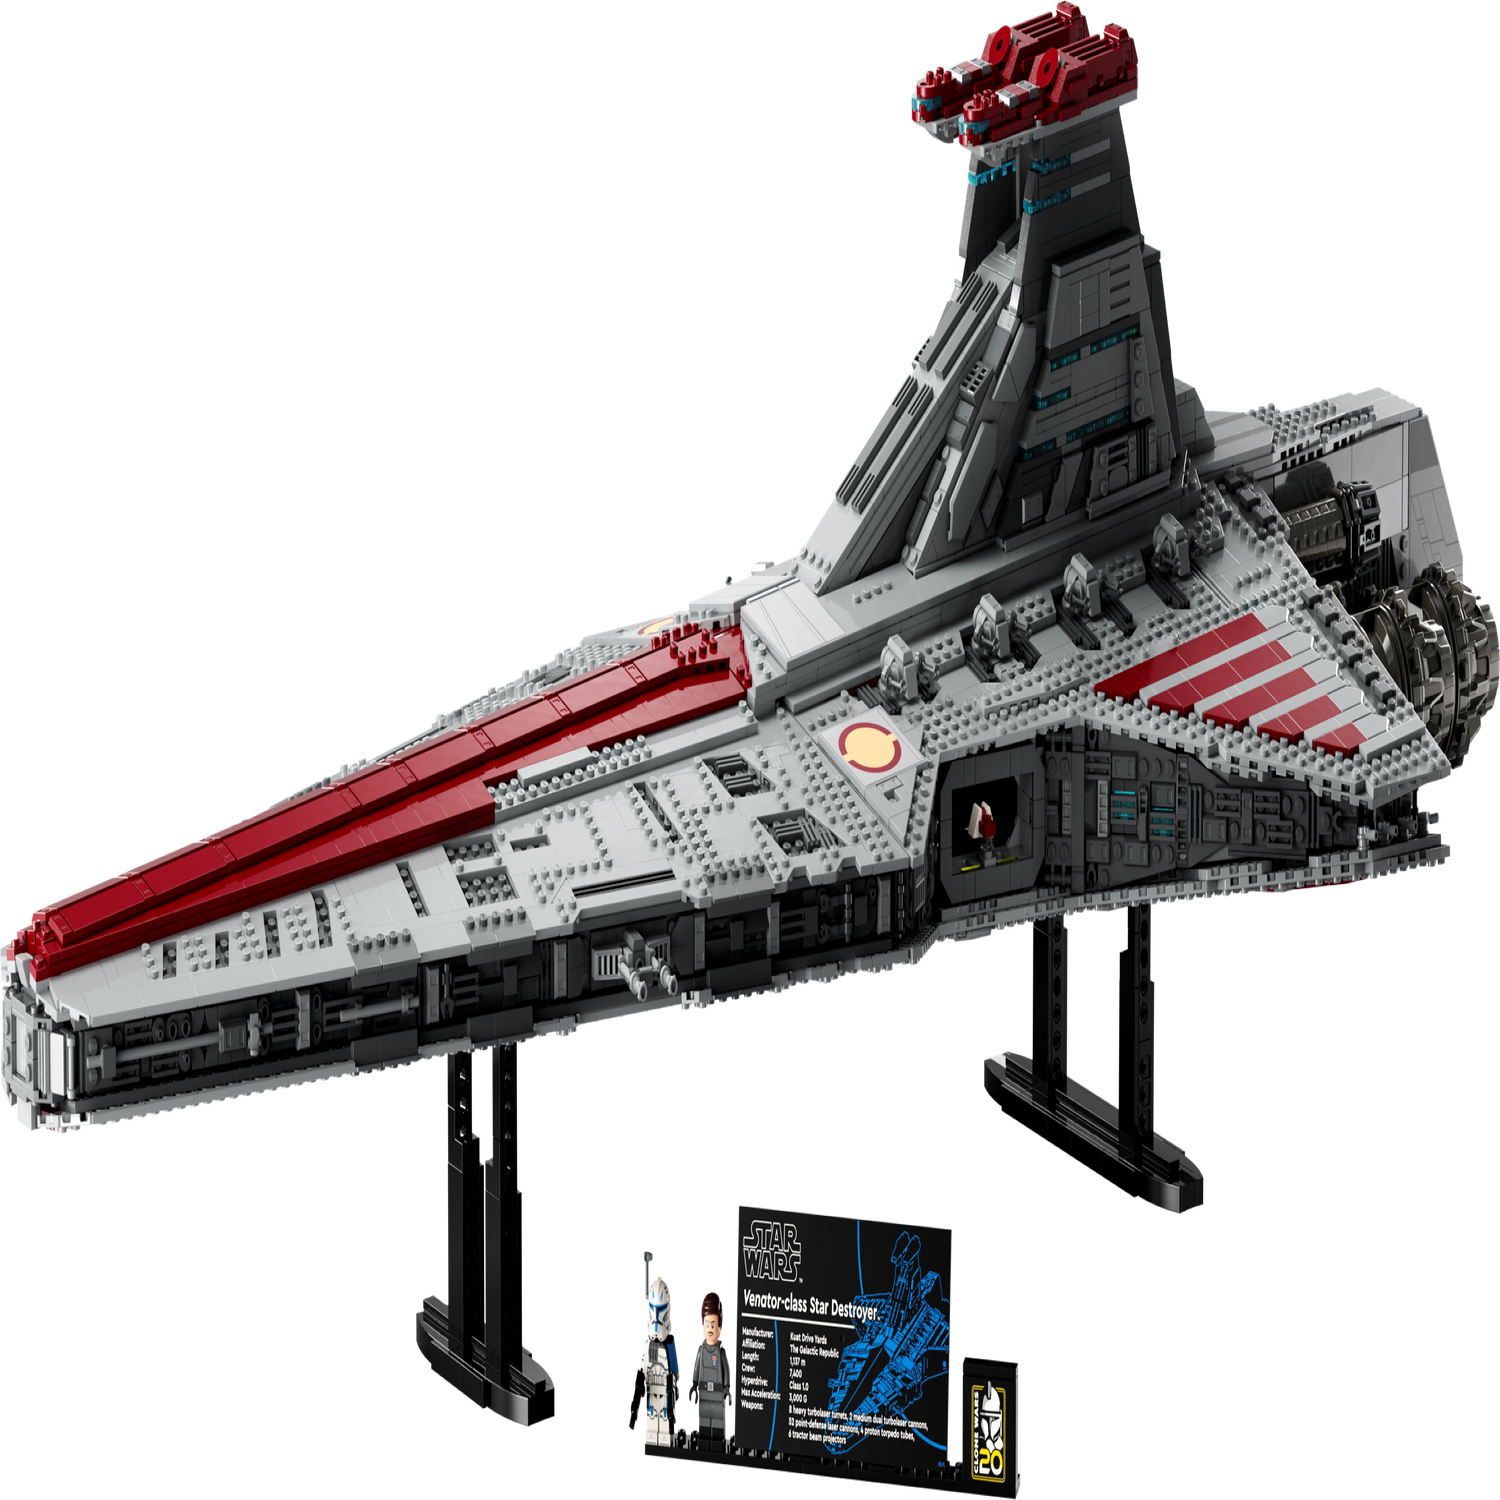 FREE UCS VENATOR! FREE RB MYSTERY MYSTERY BOX! UP TO $3000 VALUE!